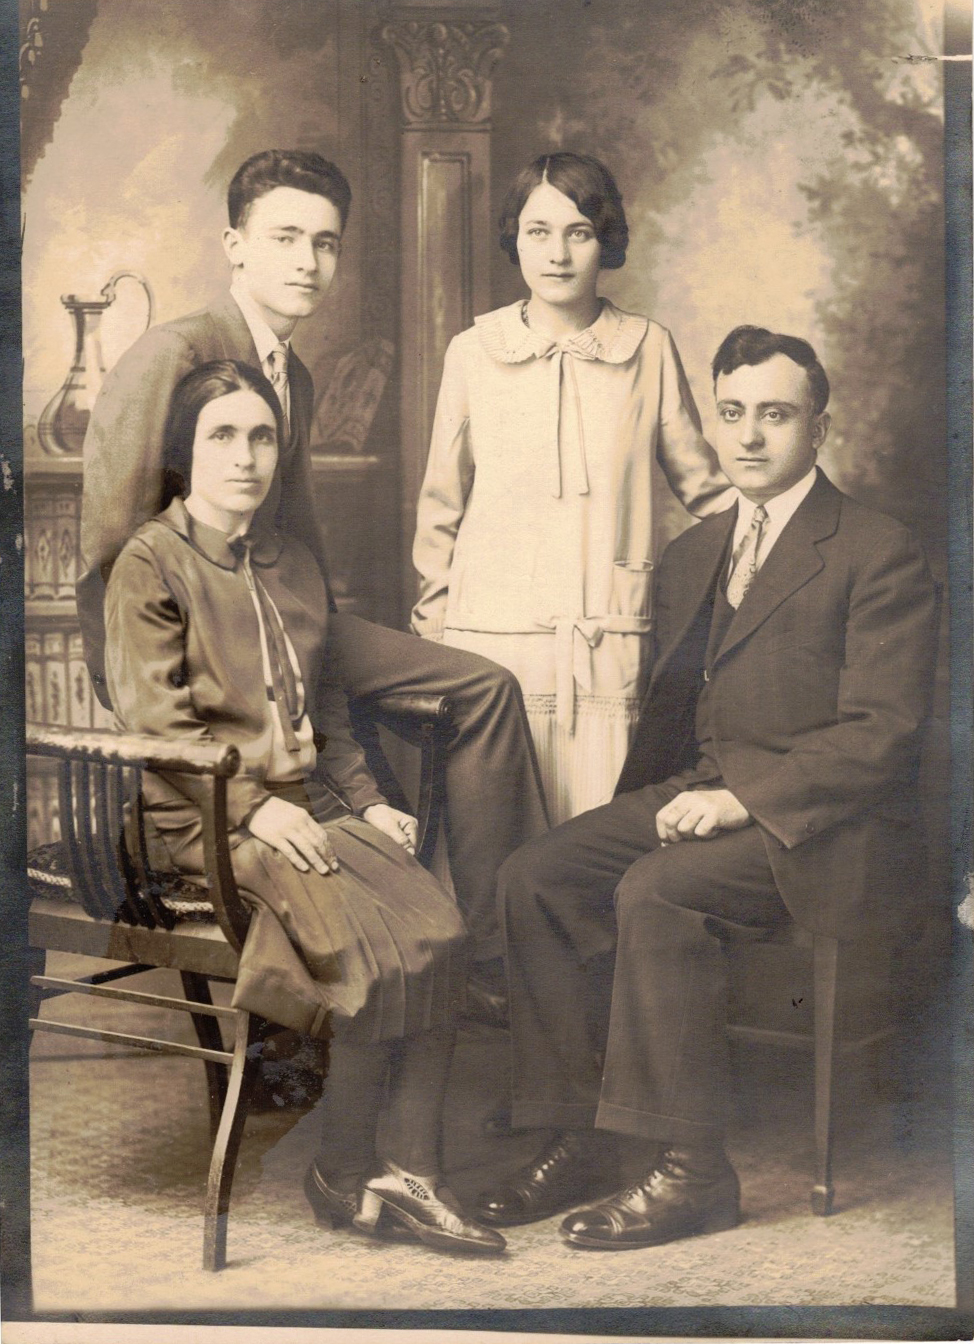 Garabed Norsigian and family late 1920s.jpg